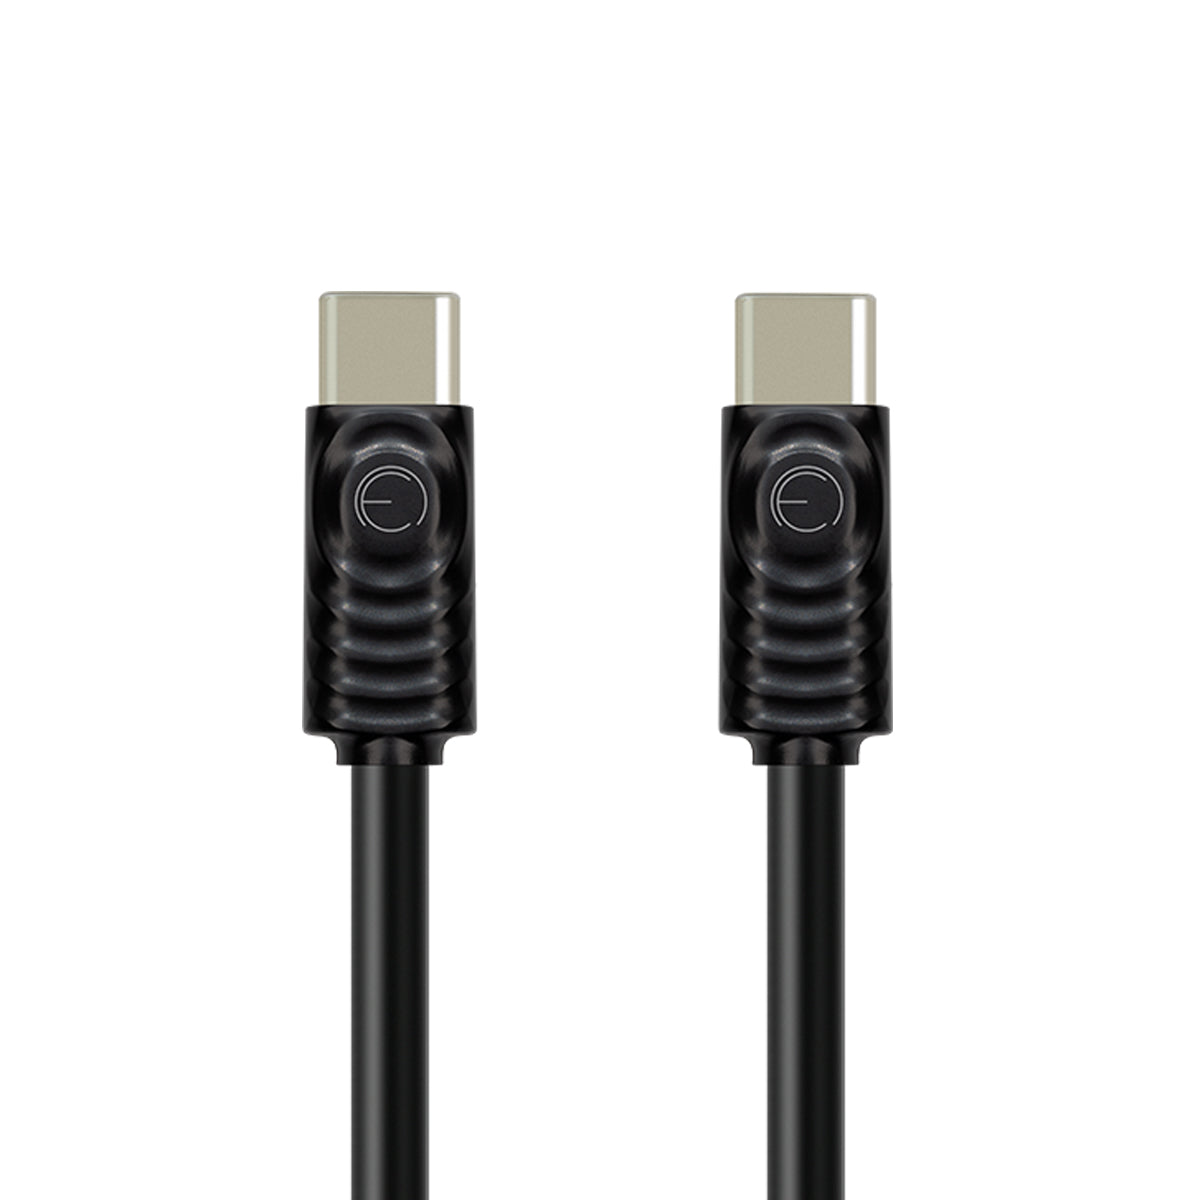 Next-Generation OE High-Performance USB Cable